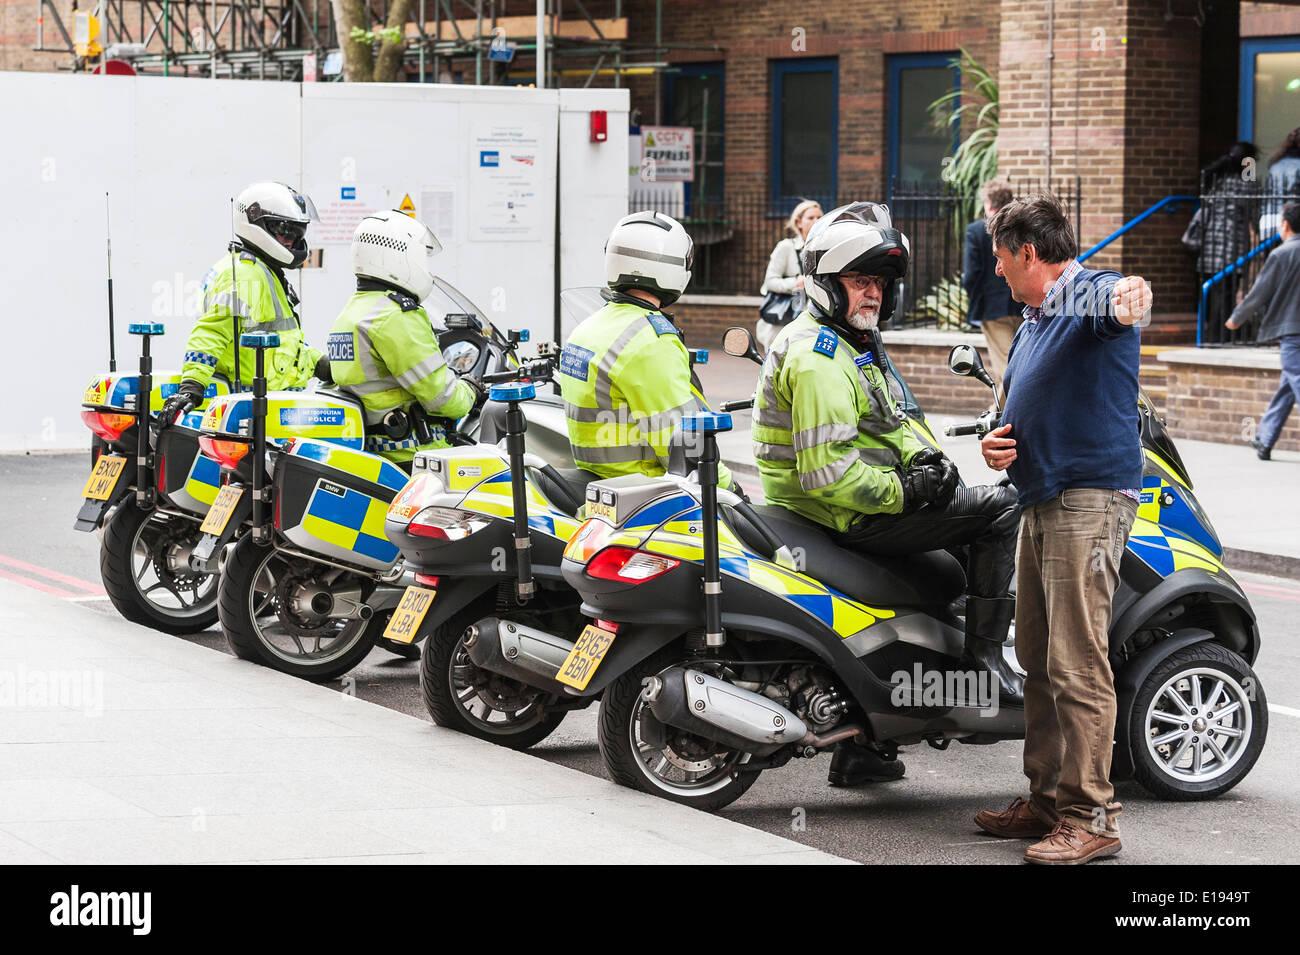 A member of the public asking for directions from a motorcycle policeman. Stock Photo